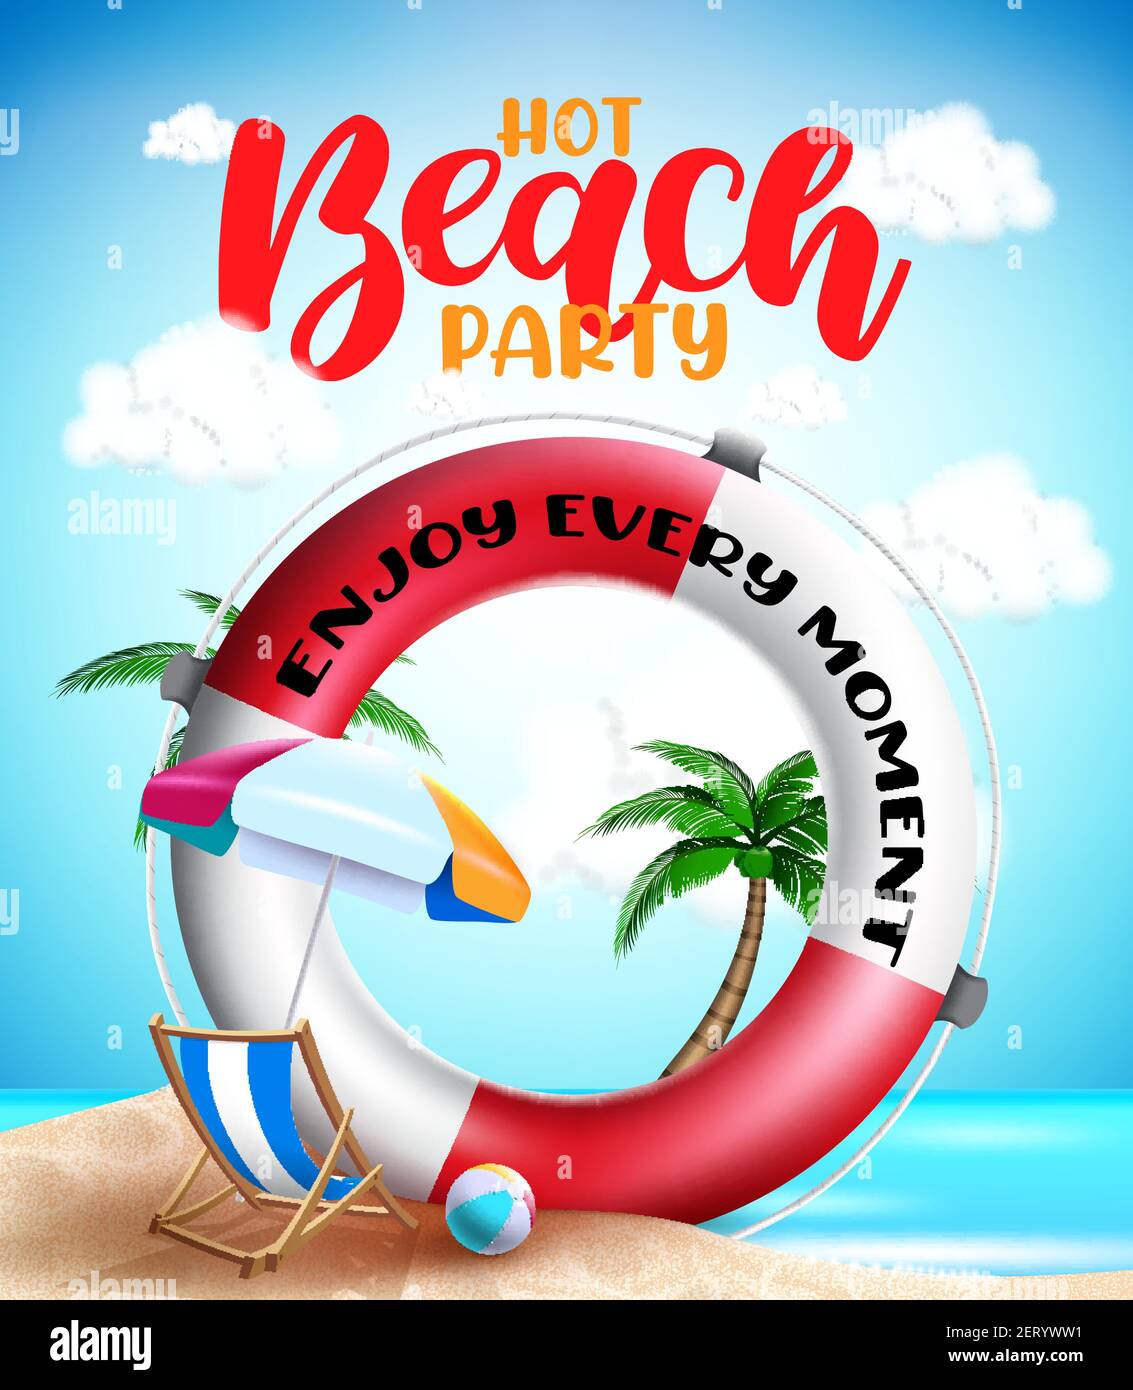 Summer beach vector banner background. Hot beach party text in seashore background with tropical season elements like lifebuoy and umbrella for fun. Stock Vector